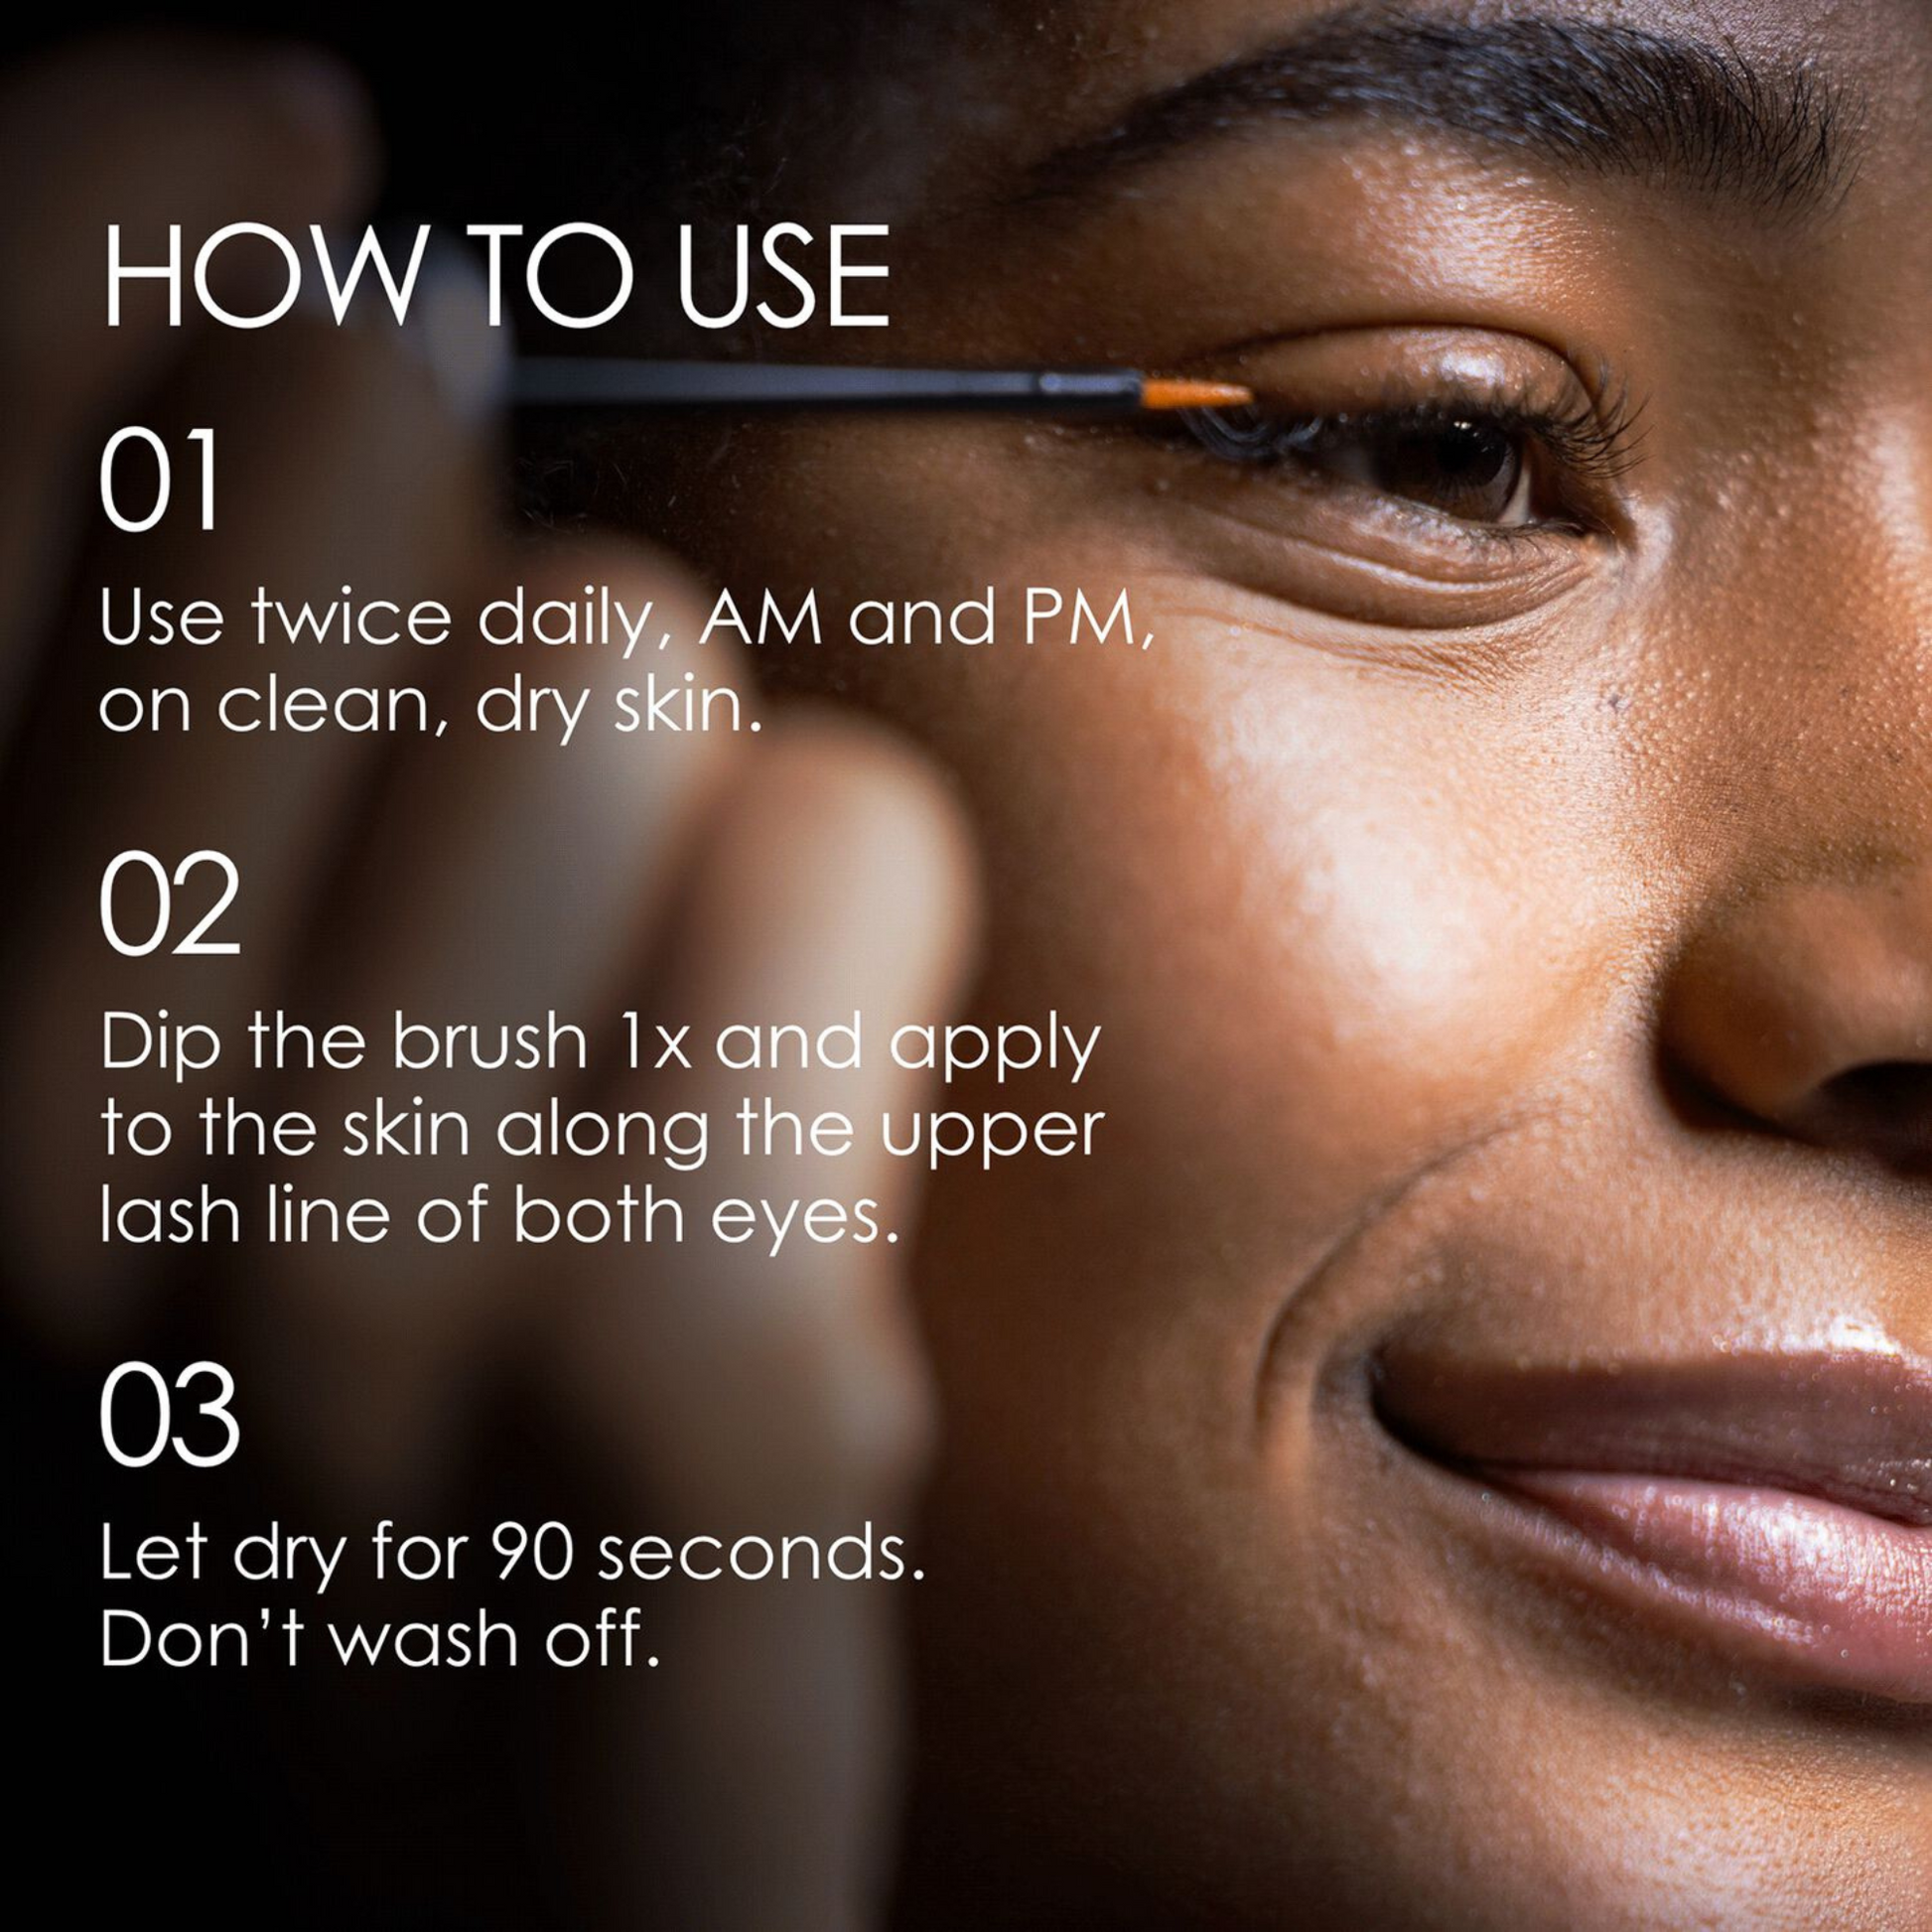 Dip the brush once and apply to the skin along the upper lash line on both eyes. Do not wash off. Allow to dry for at least 90 seconds before applying other eye products. Don’t apply to the lower lash line. 3 months of daily use per tube